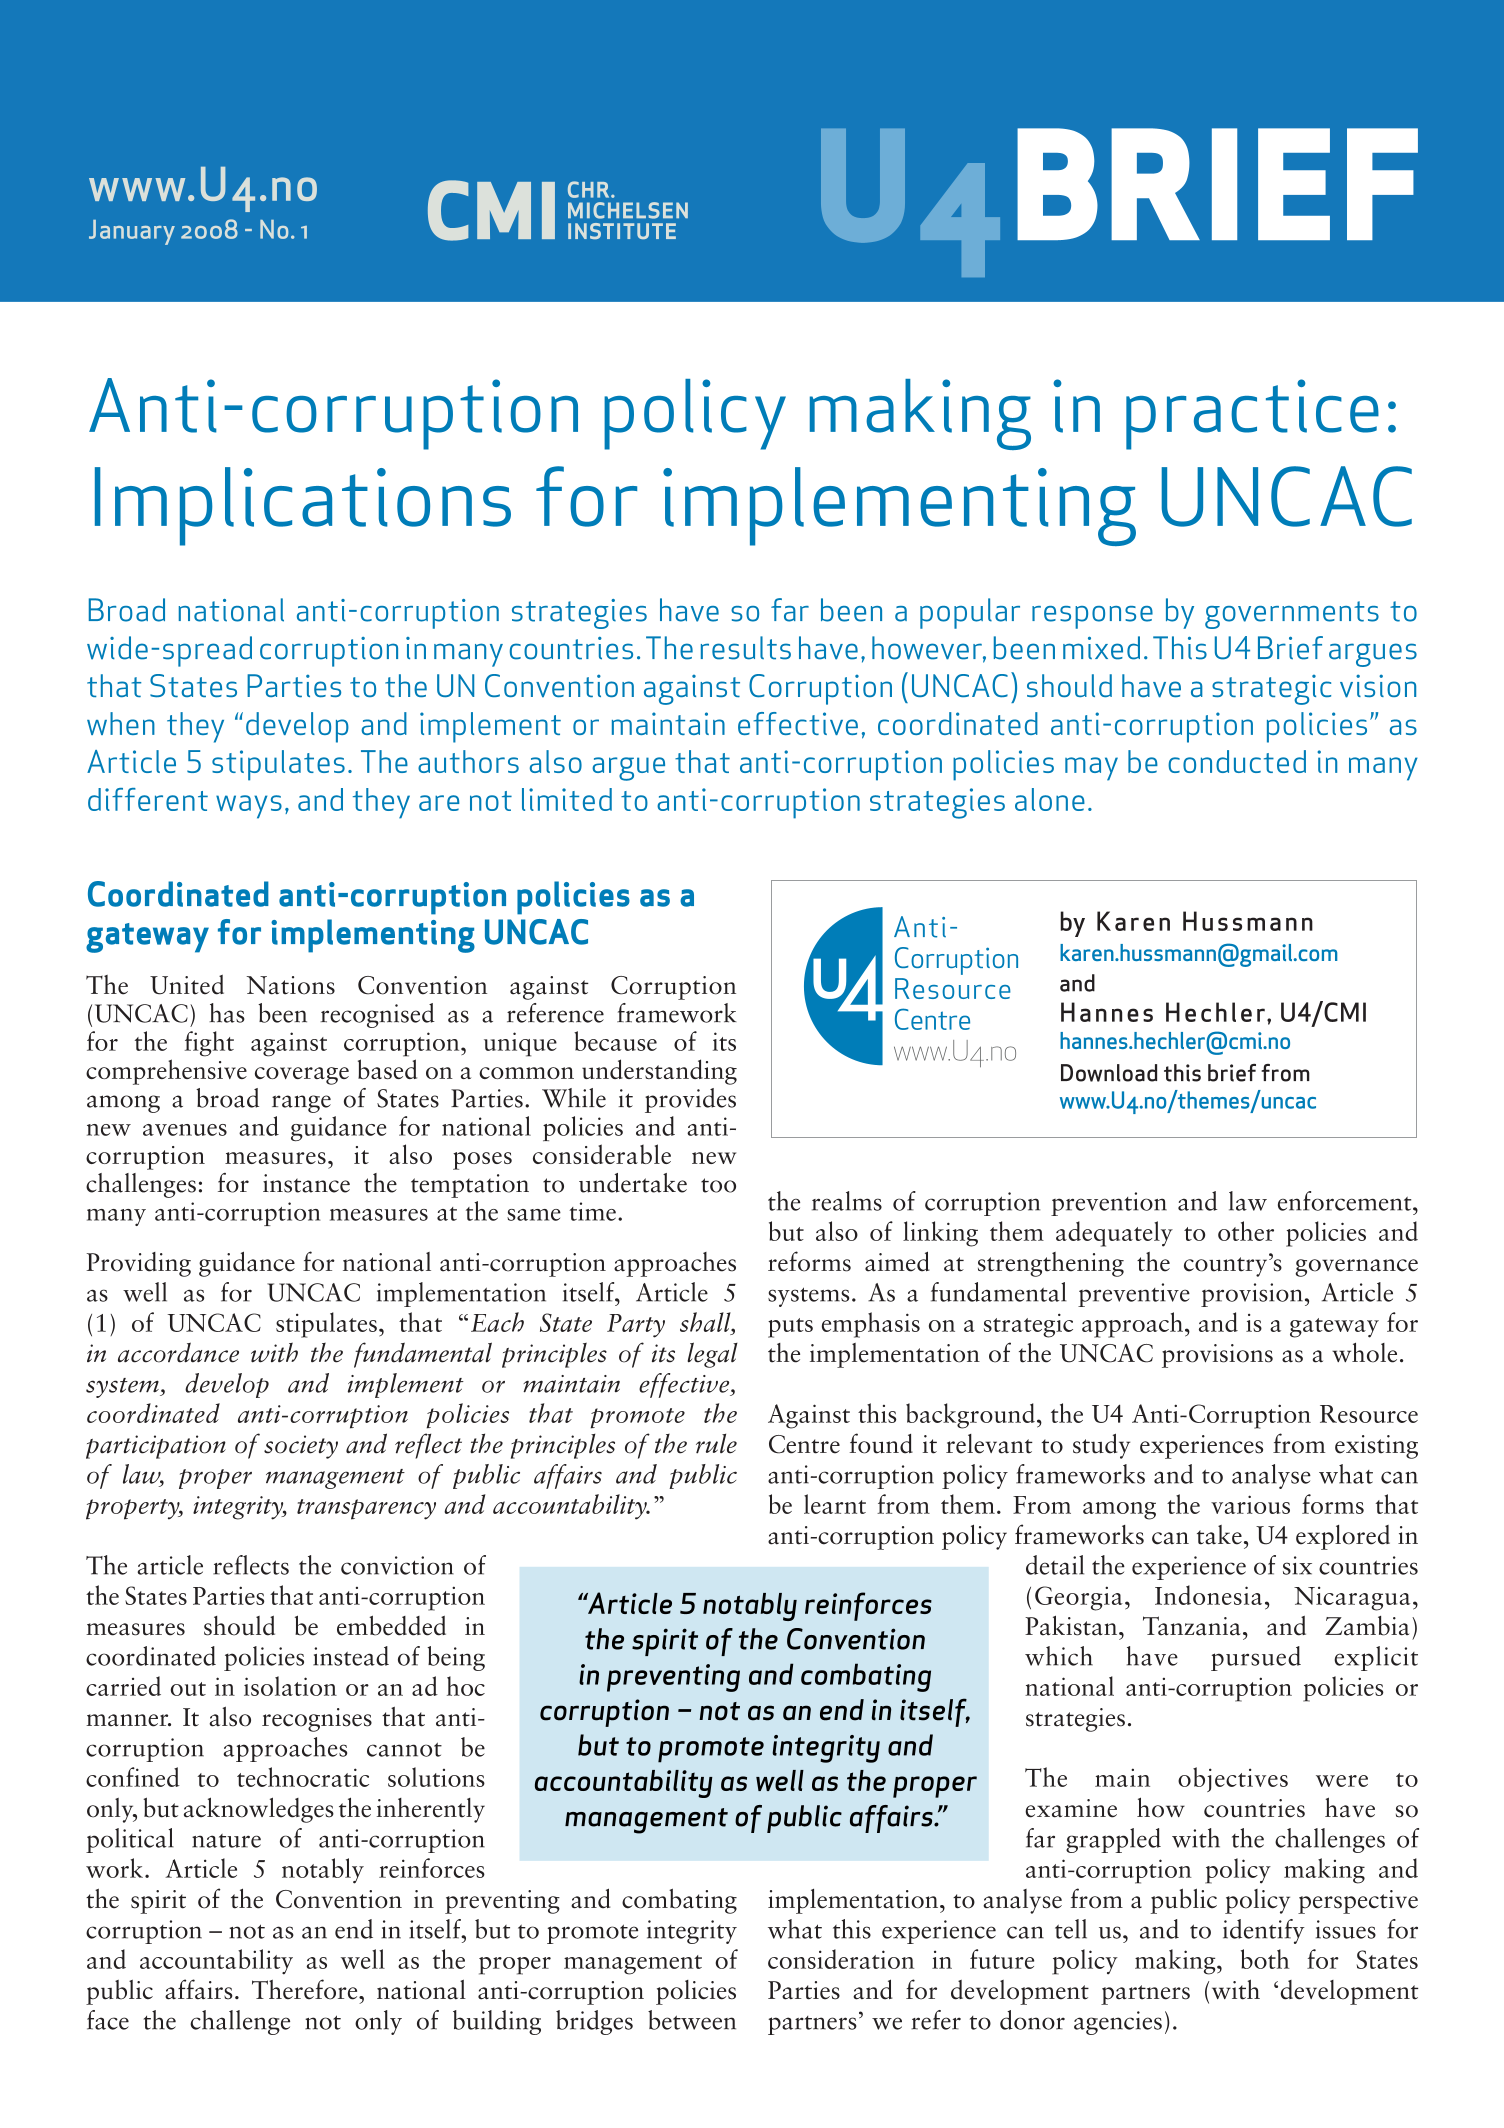 Anti-corruption Policy Making in Practice: Implications for Implementing UNCAC